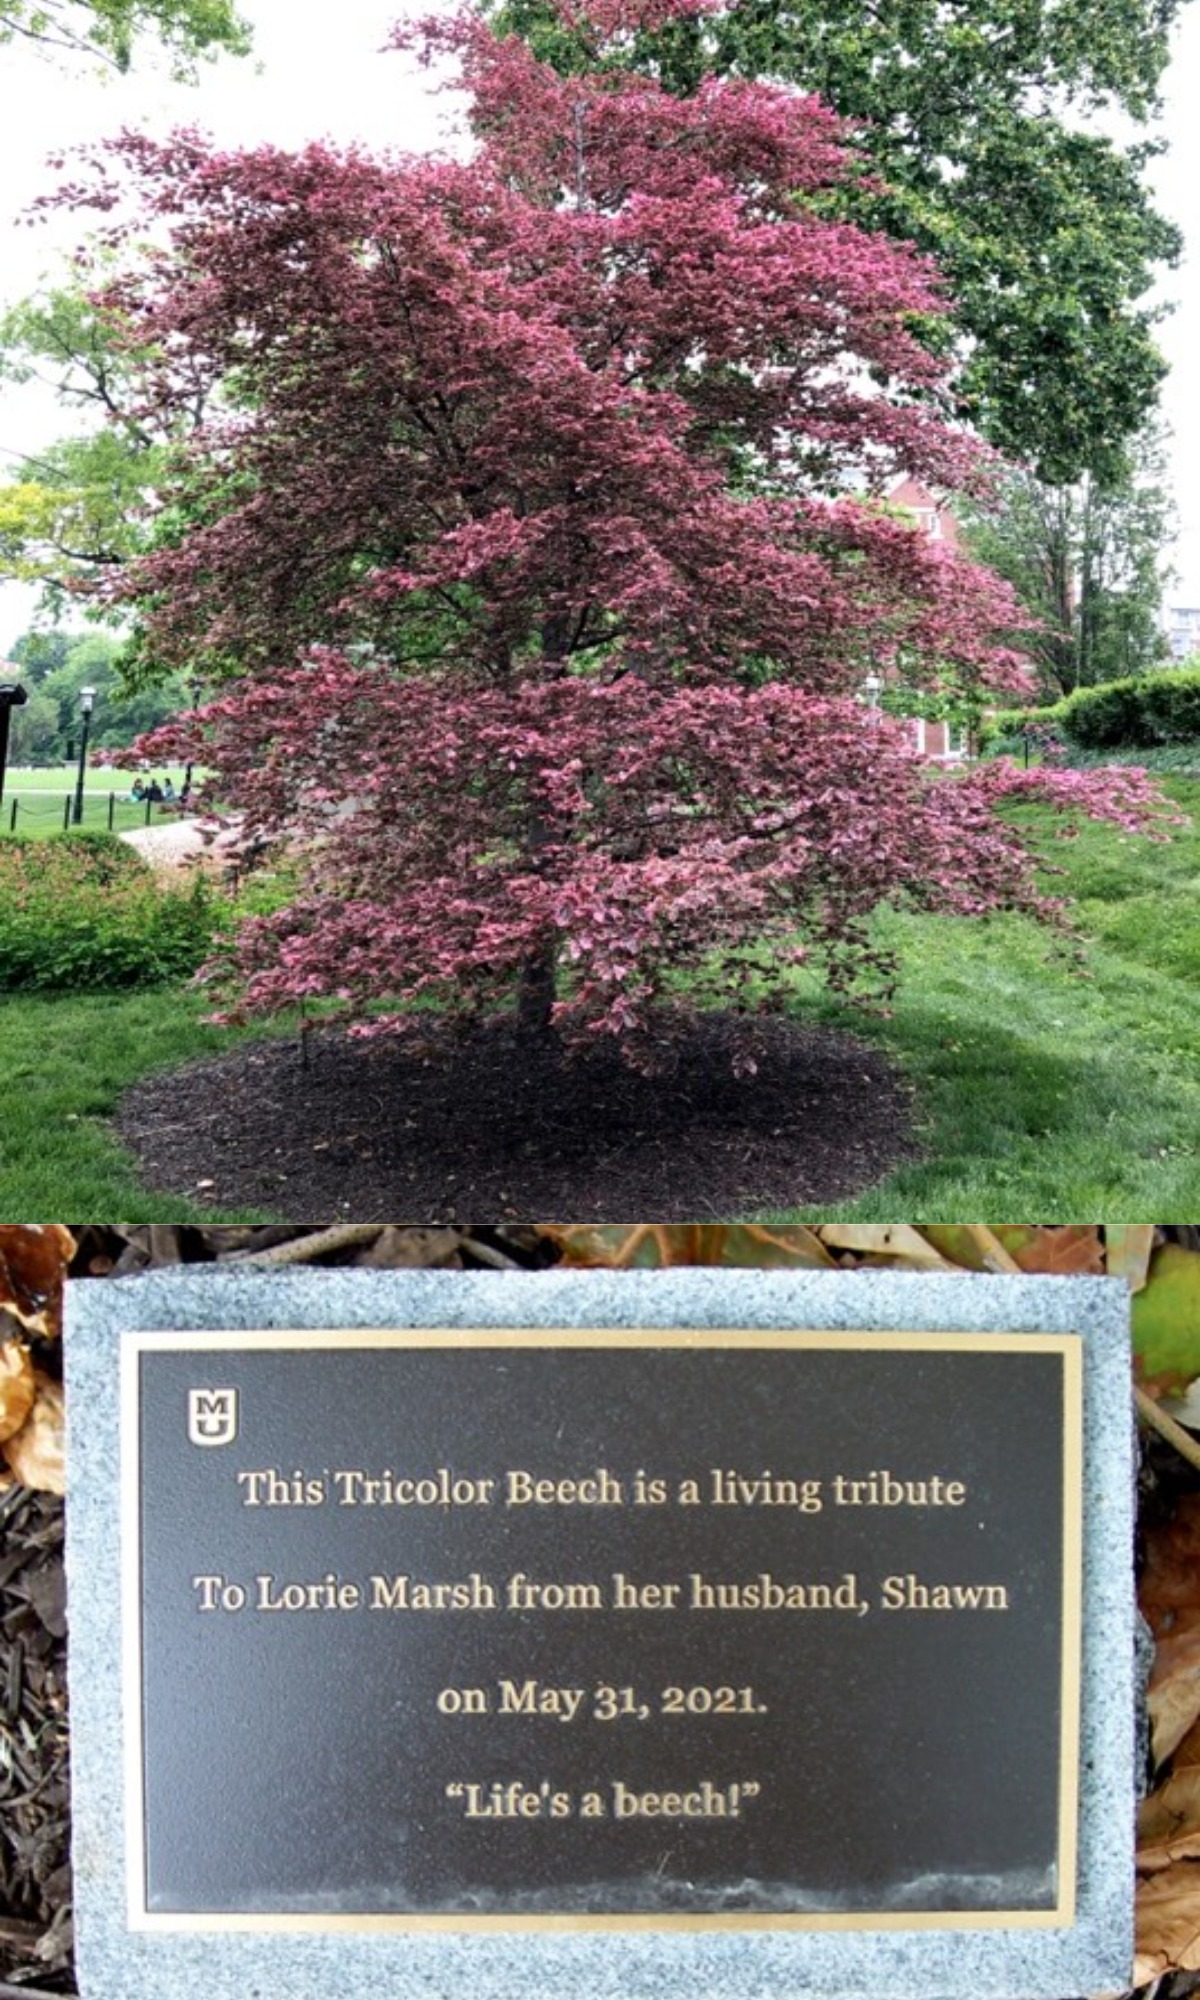 At top, the tricolor beech — in its spring finery — that Shawn Marsh dedicated to his wife Lori for her birthday as part MUBG’s Tribute Tree program. Above is the dedication plaque with its clever “Life’s a Beech” message.